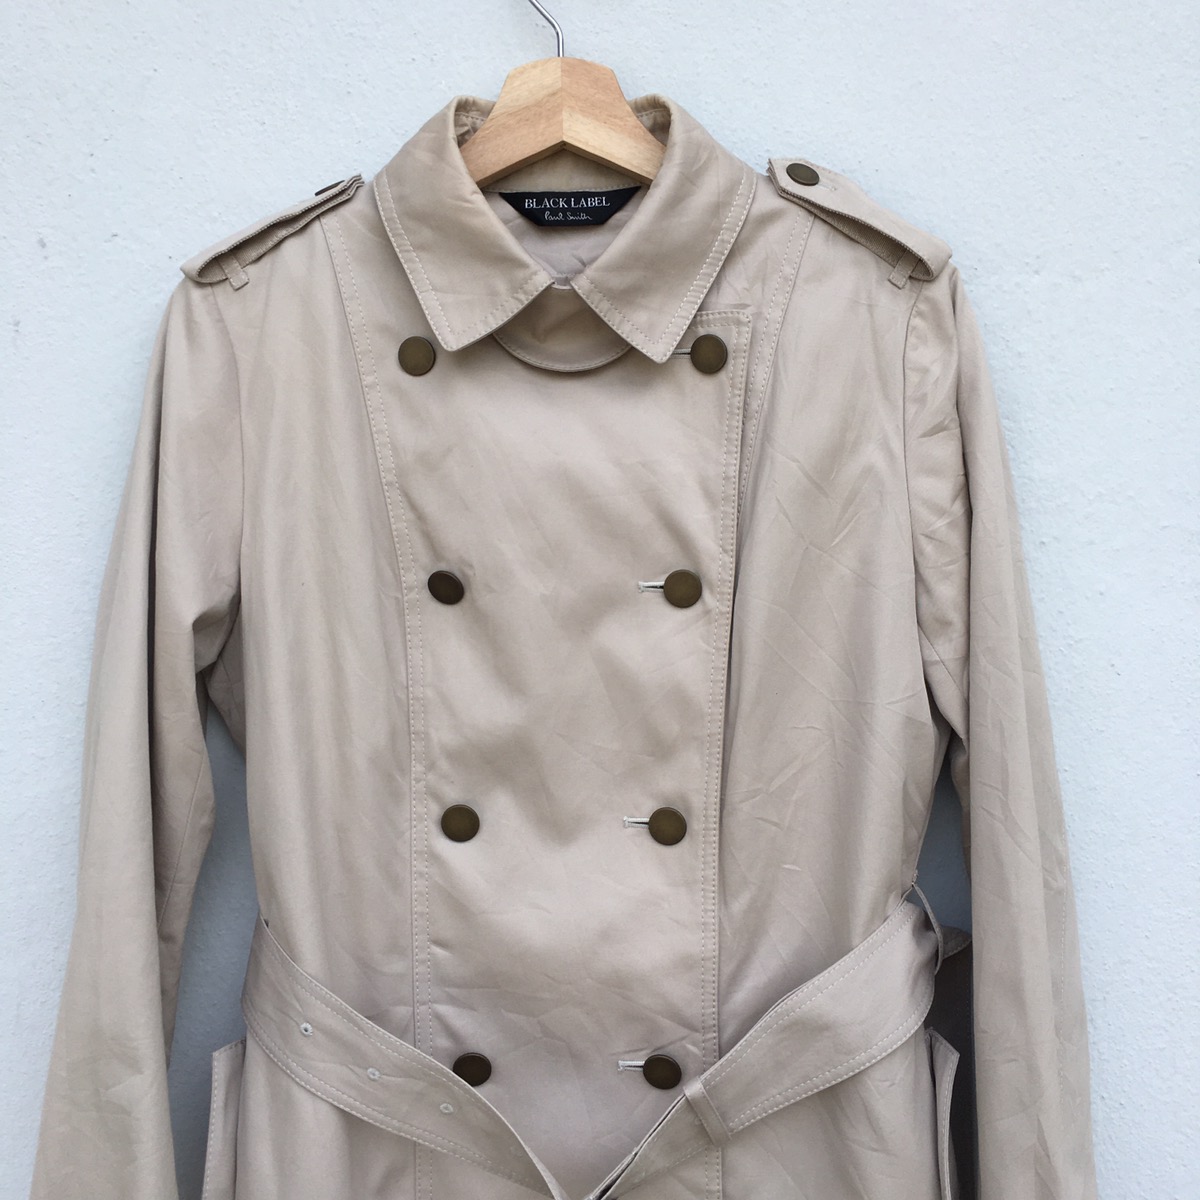 Paul Smith Belted Trench Coat - 5